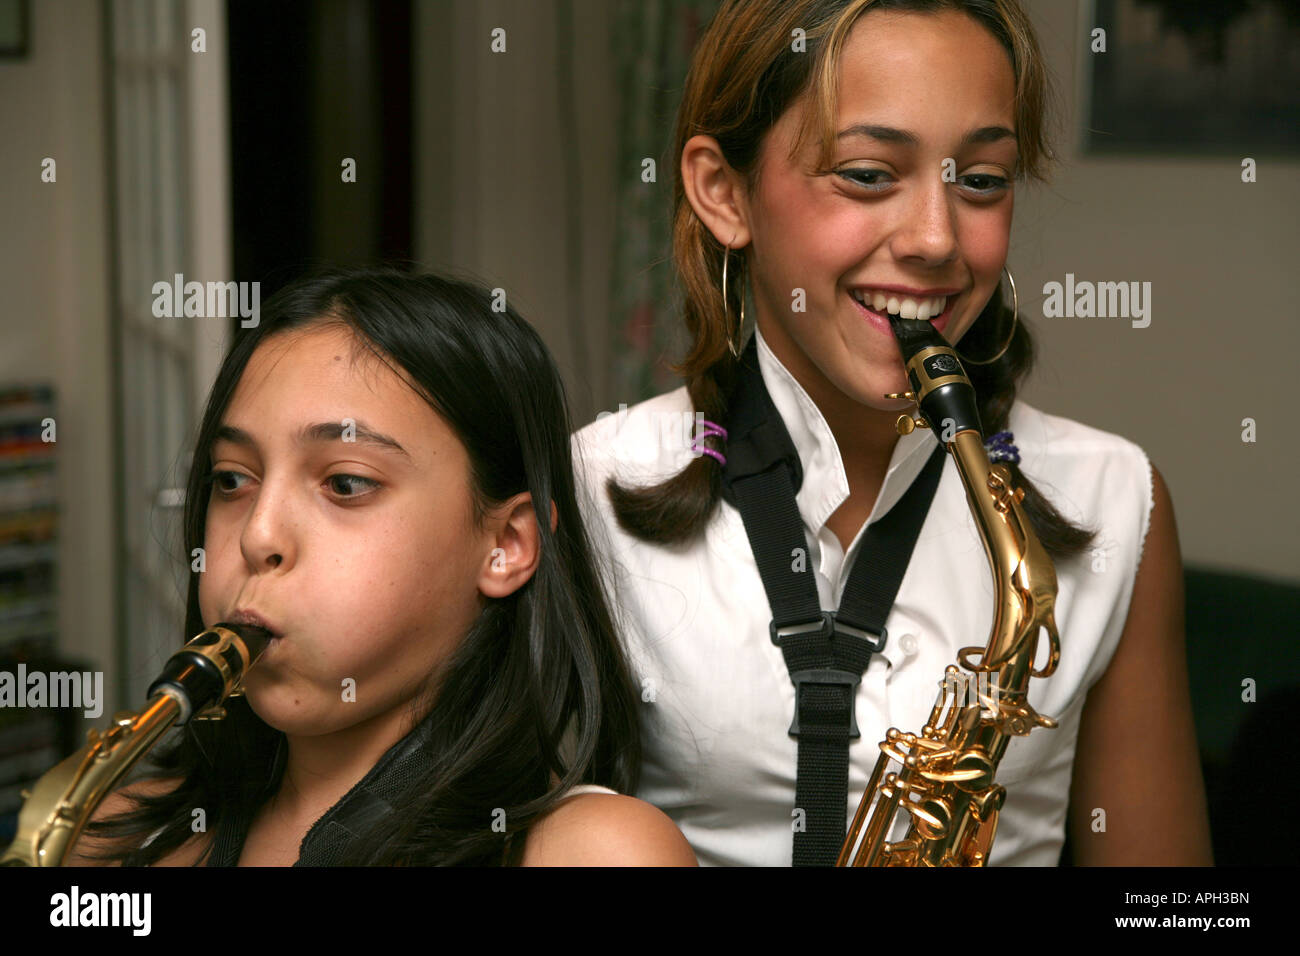 Two sisters playing saxophones Stock Photo